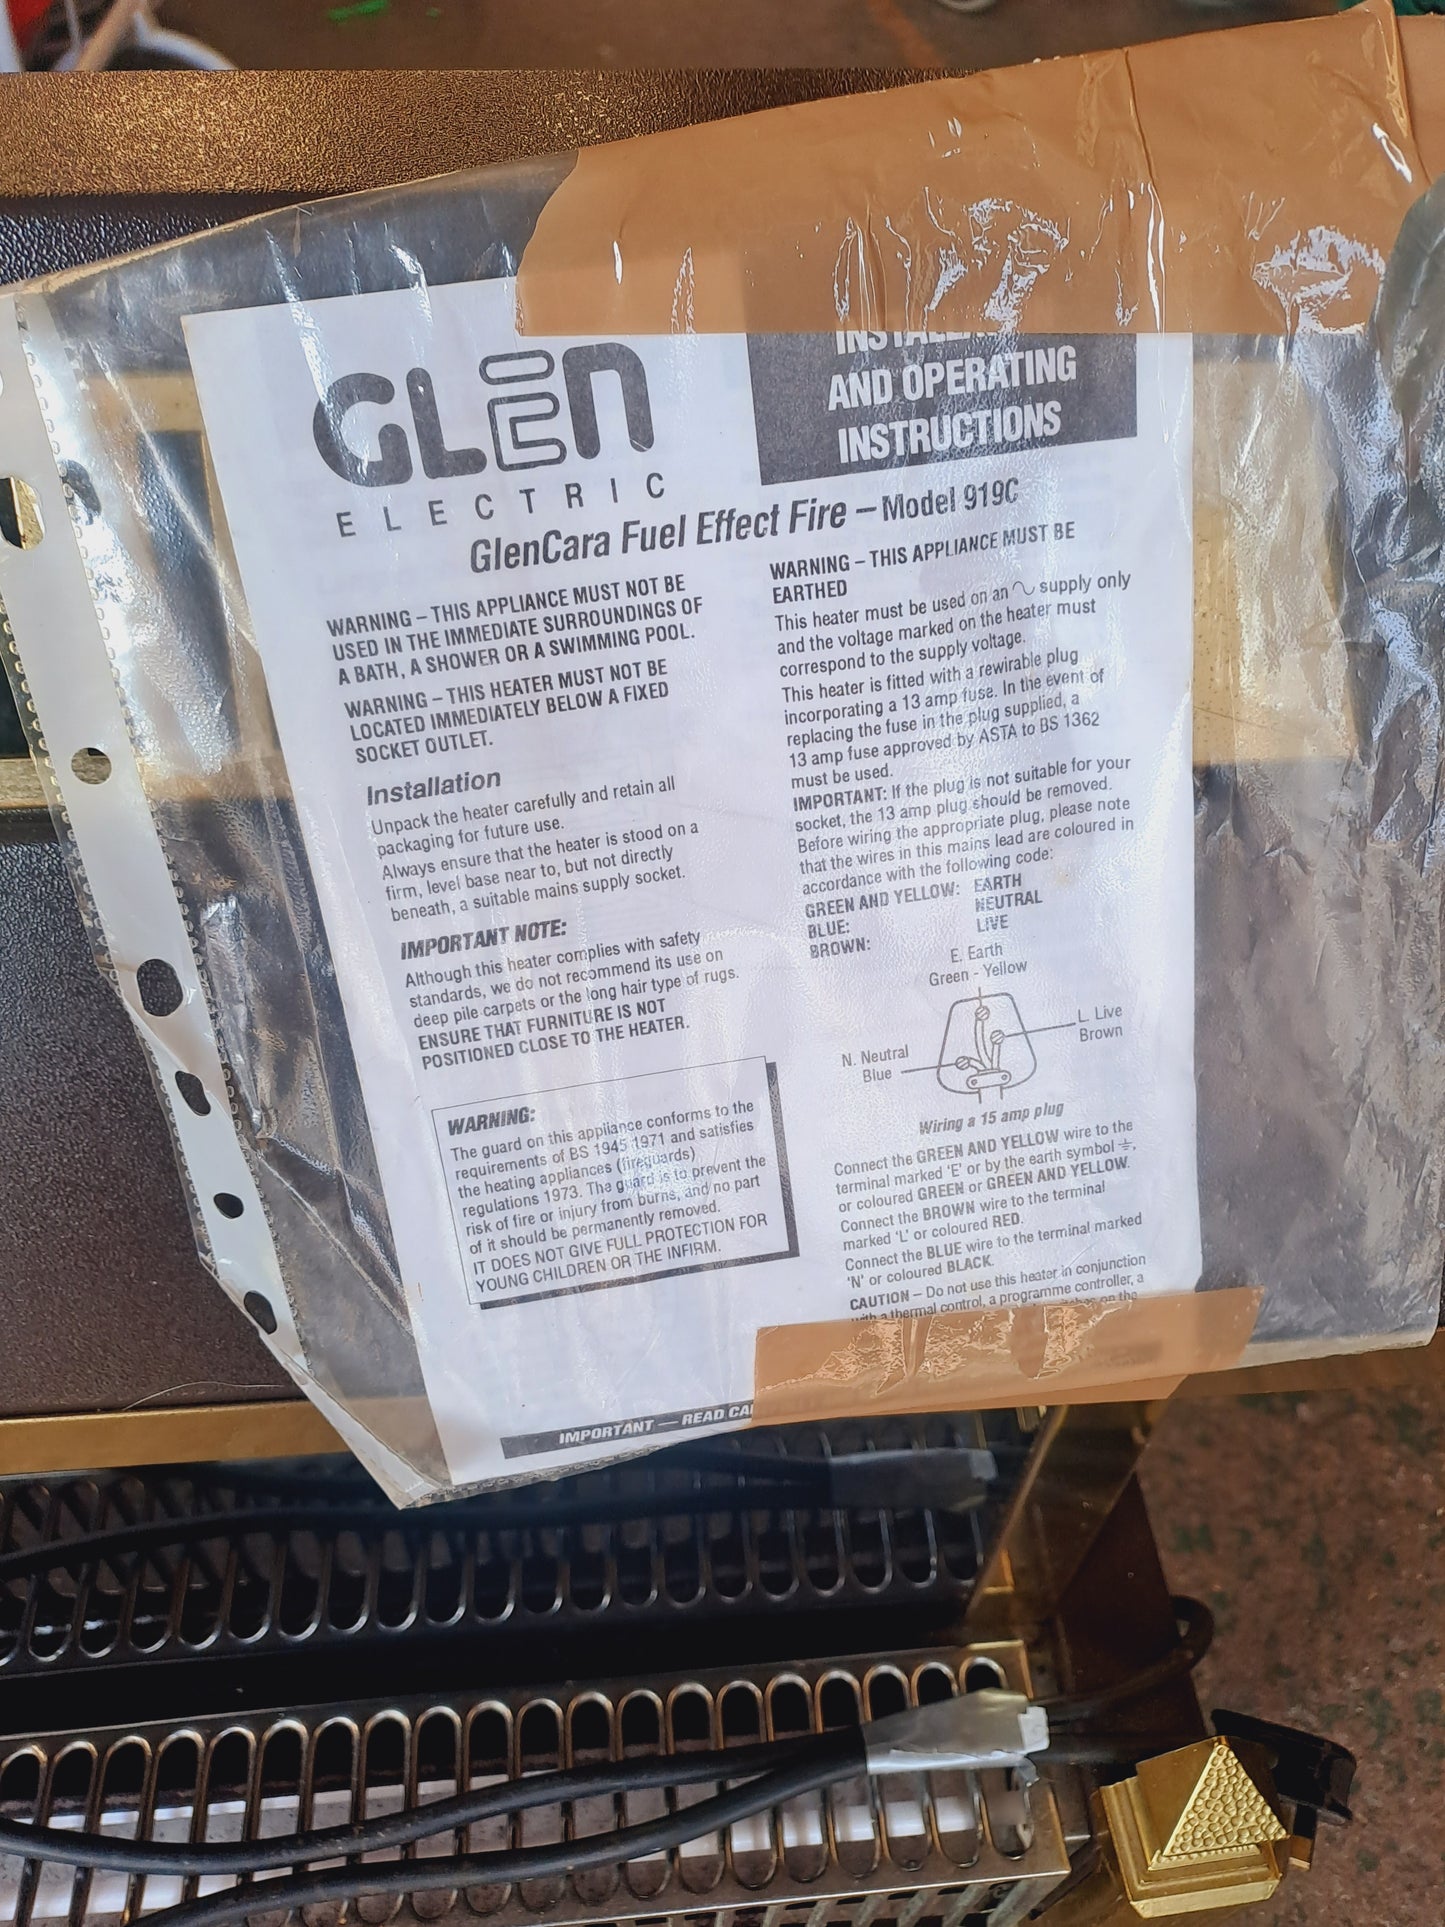 Glen electric Fuel Effect fire - Model 919c *2 Available*